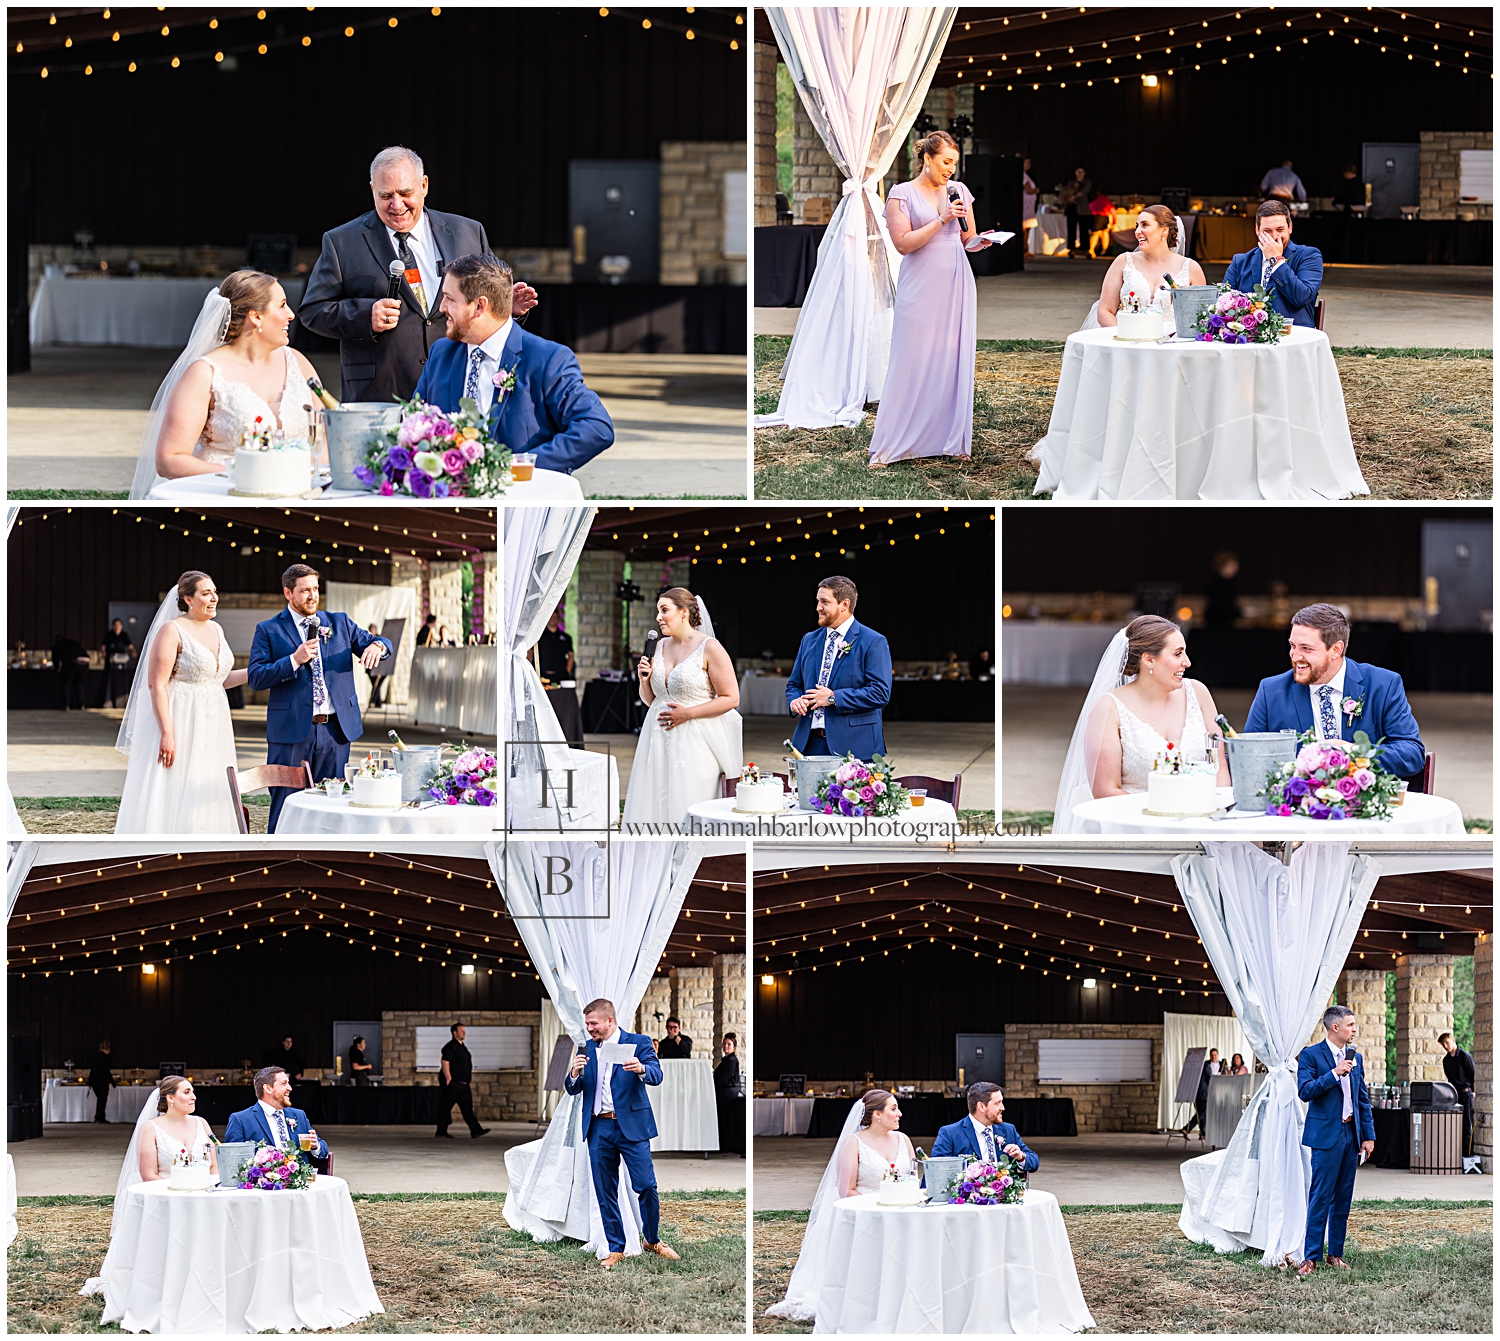 Wedding speeches are highlight at spring, tent wedding.